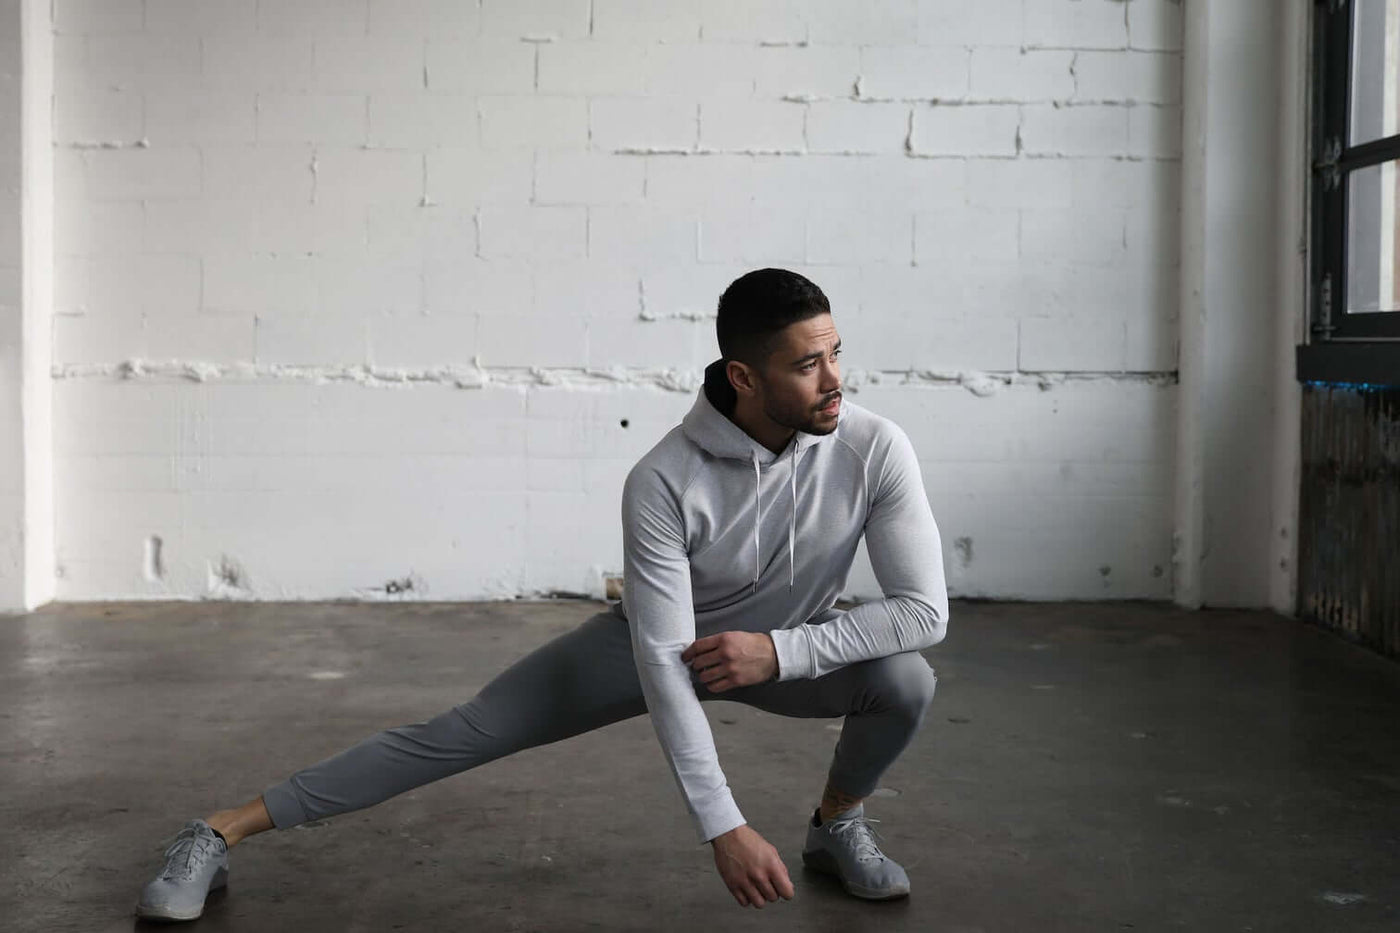 Man stretching in Truwear gray hoodie, jogging pants, and shoes